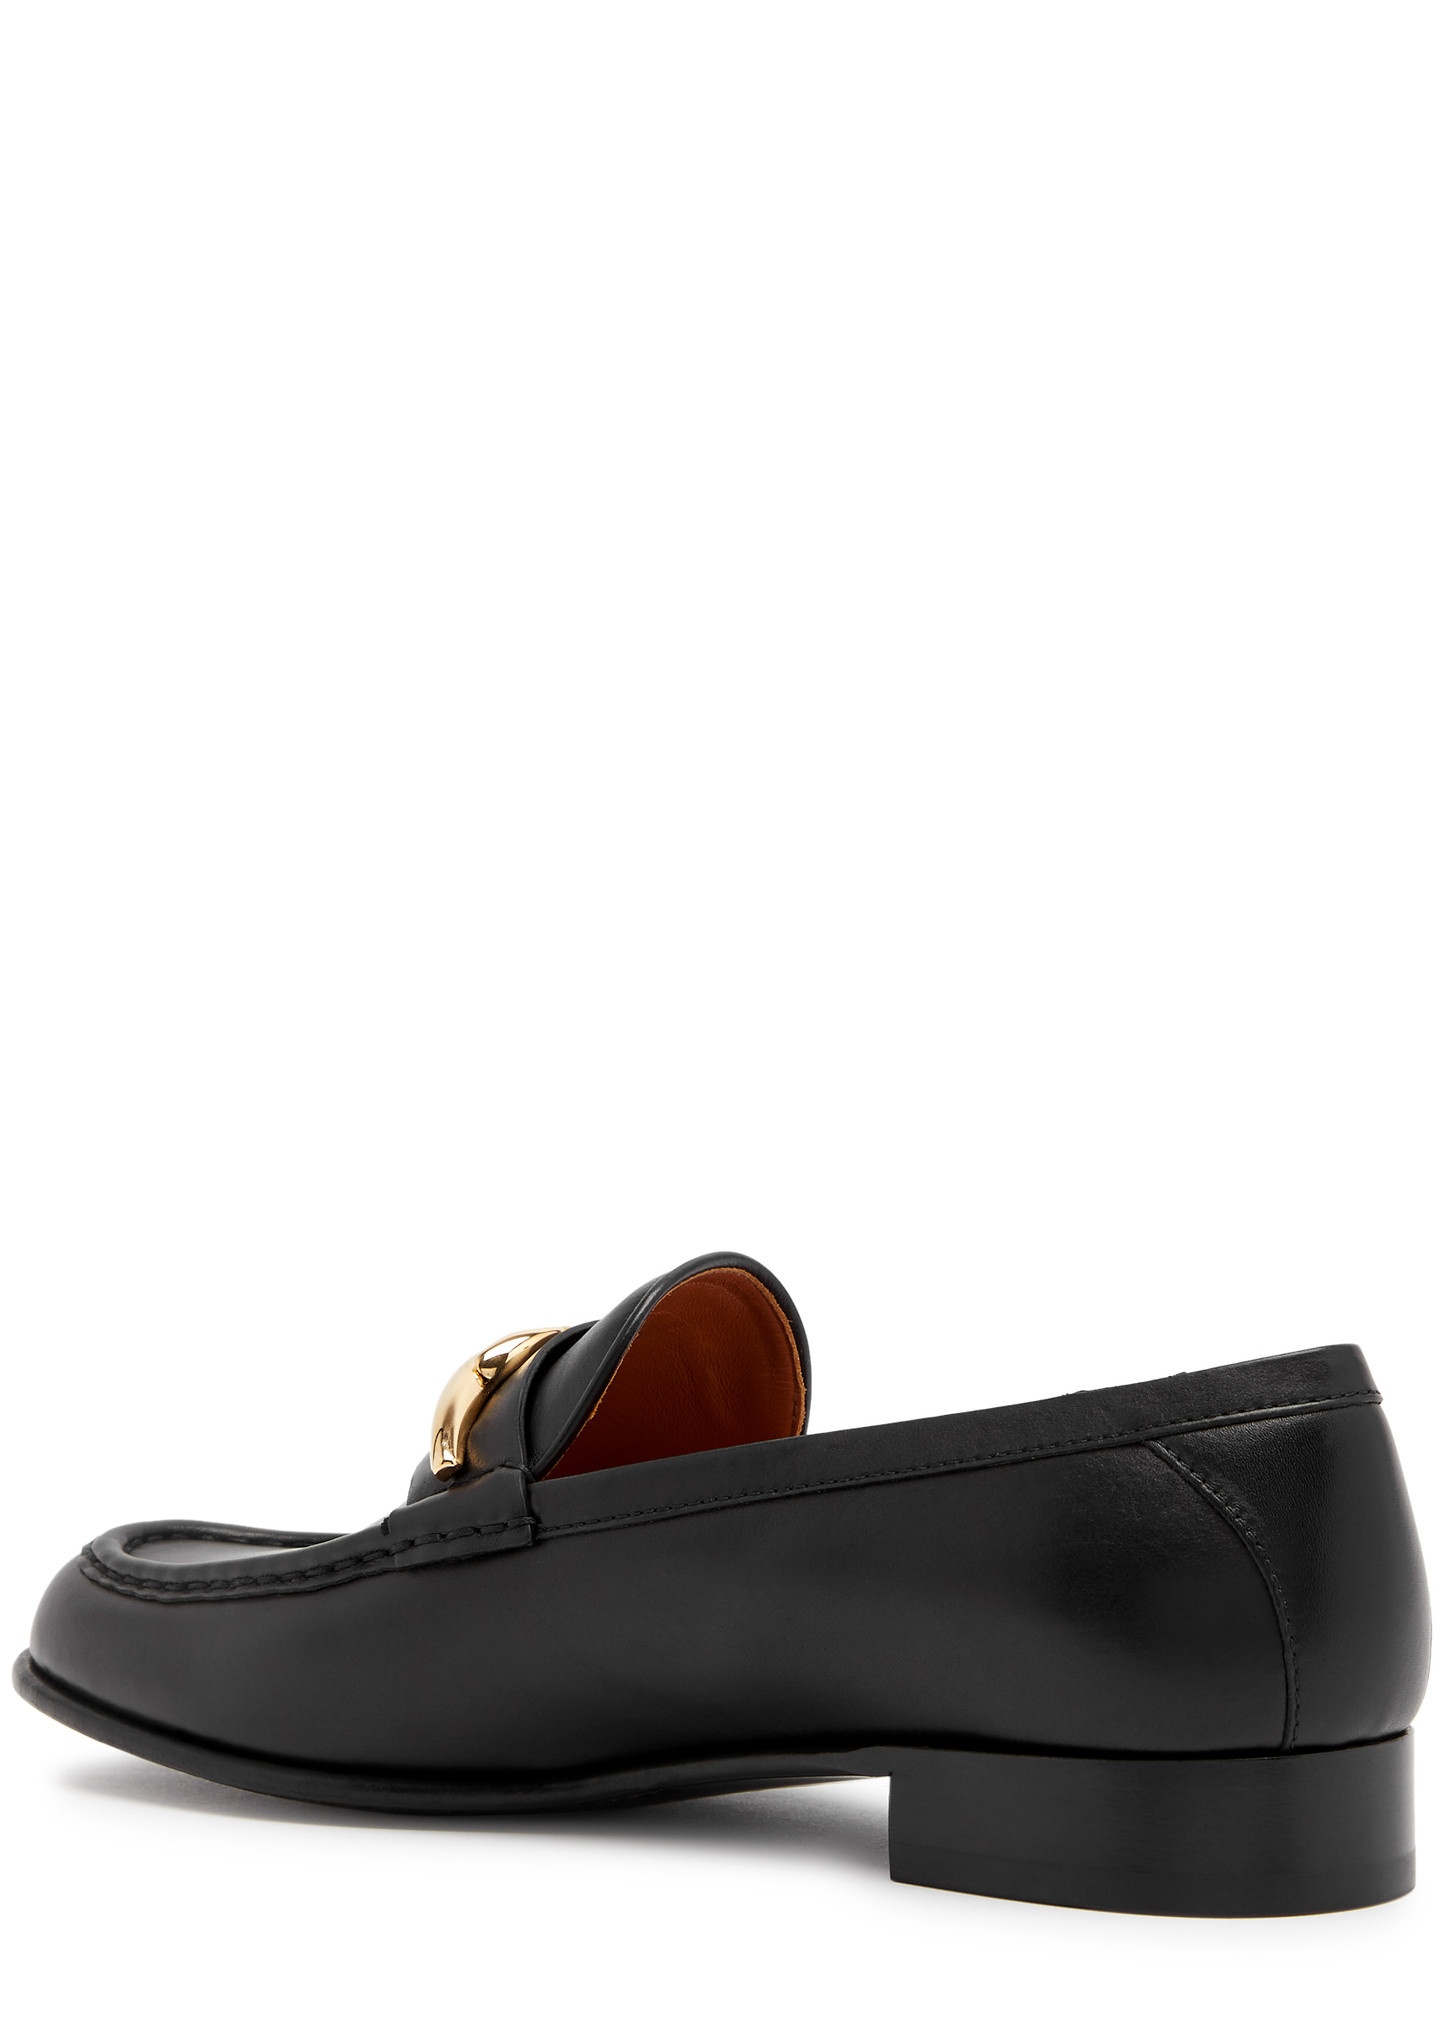 VLogo leather loafers - 2